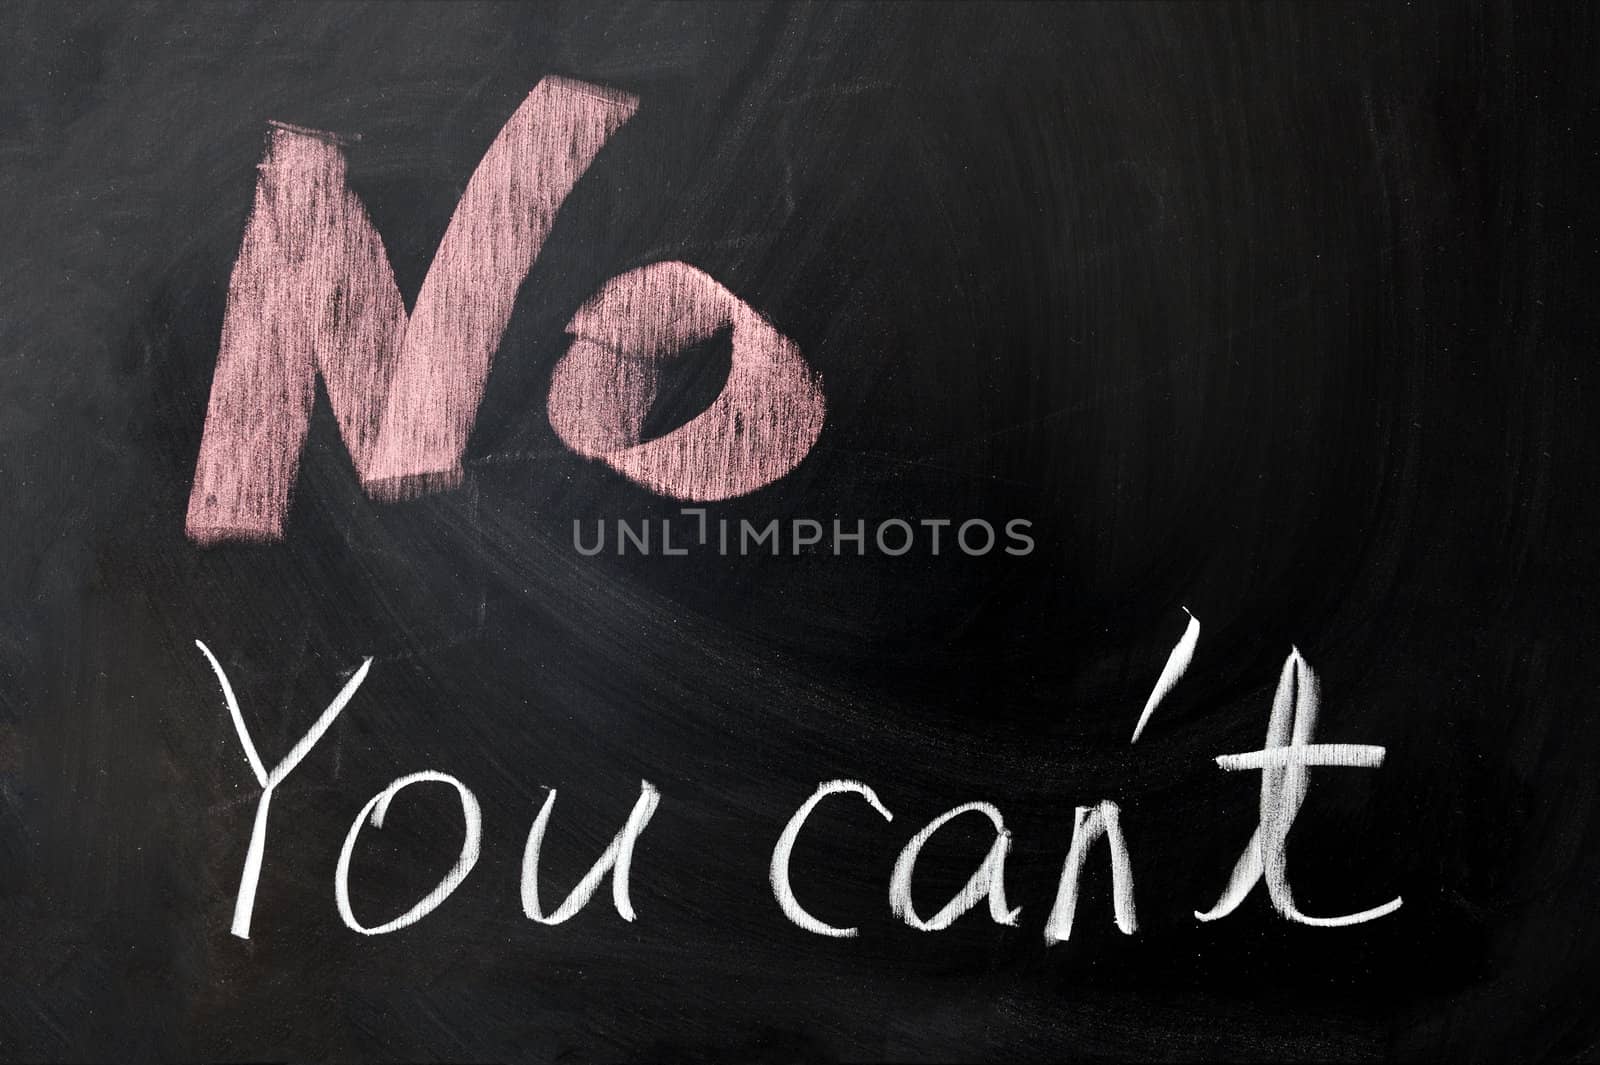 "No you can't" on chalkboard by raywoo